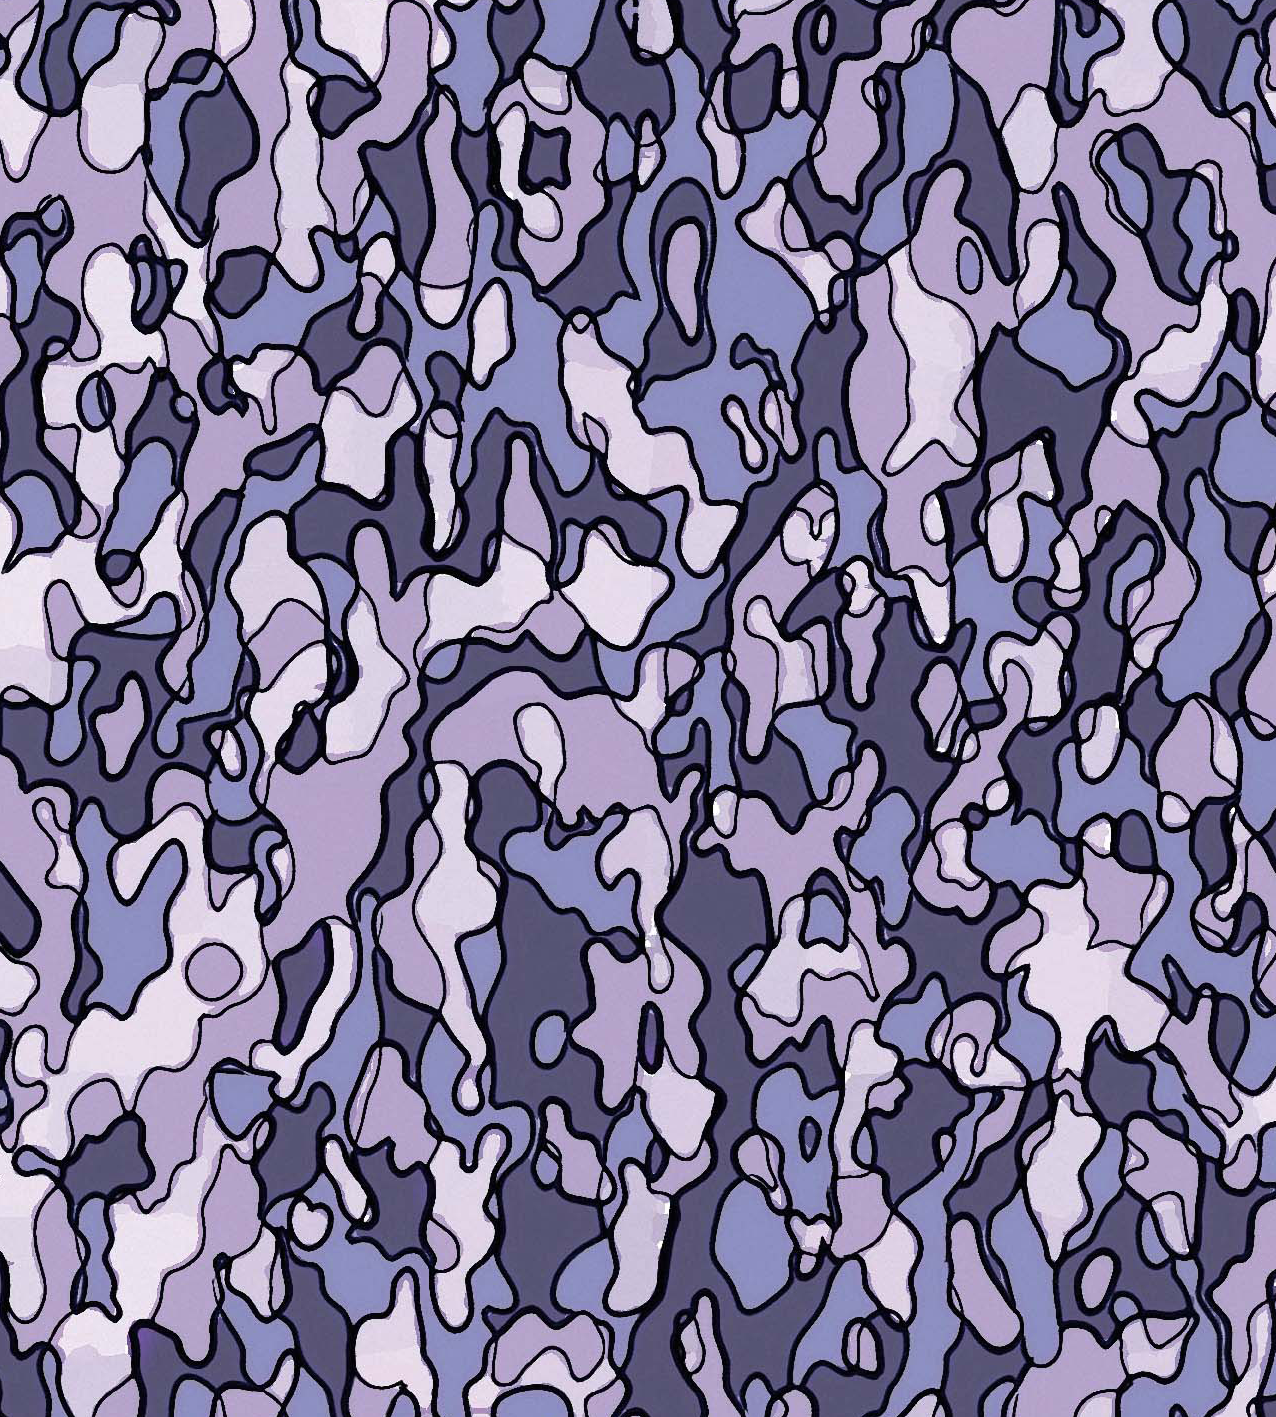 46 - ABSTRACT CAMOUFLAGE TEXTURES VOL1